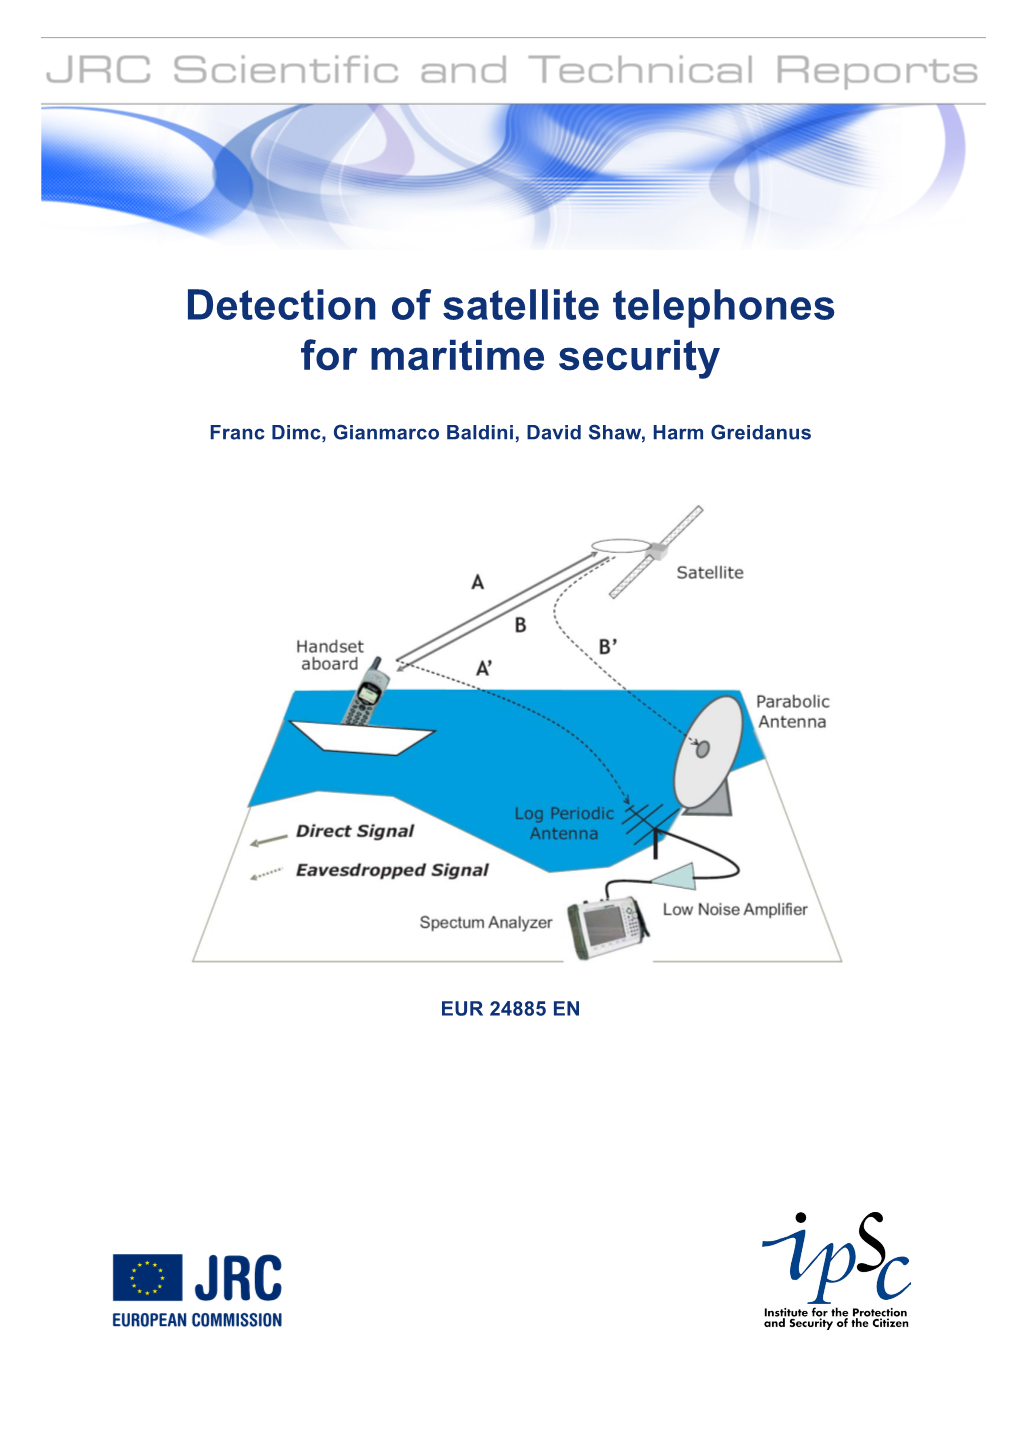 Detection of Satellite Telephones for Maritime Security